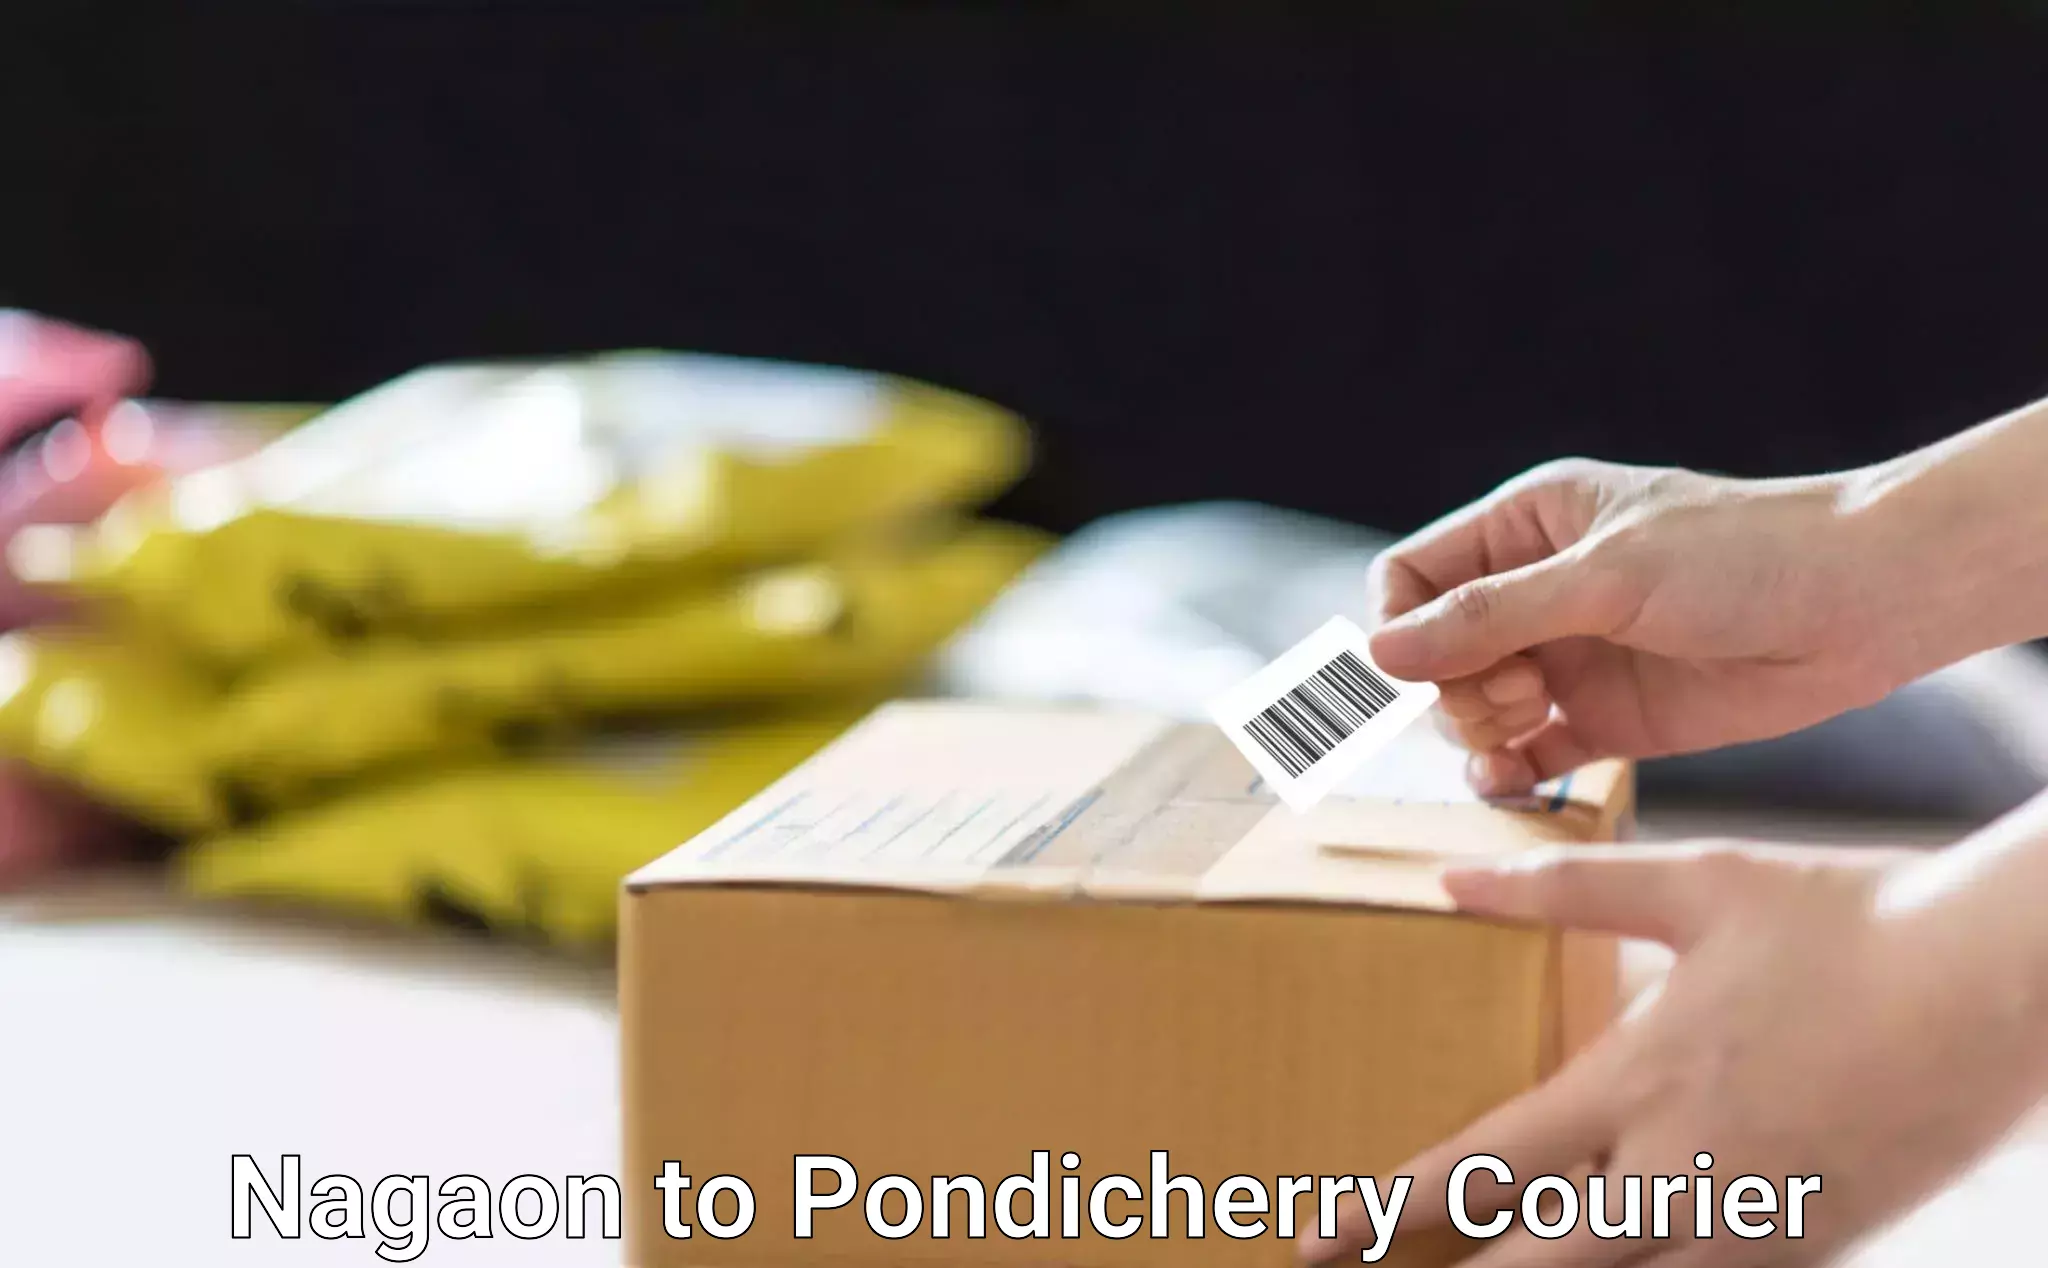 Nationwide parcel services Nagaon to Pondicherry